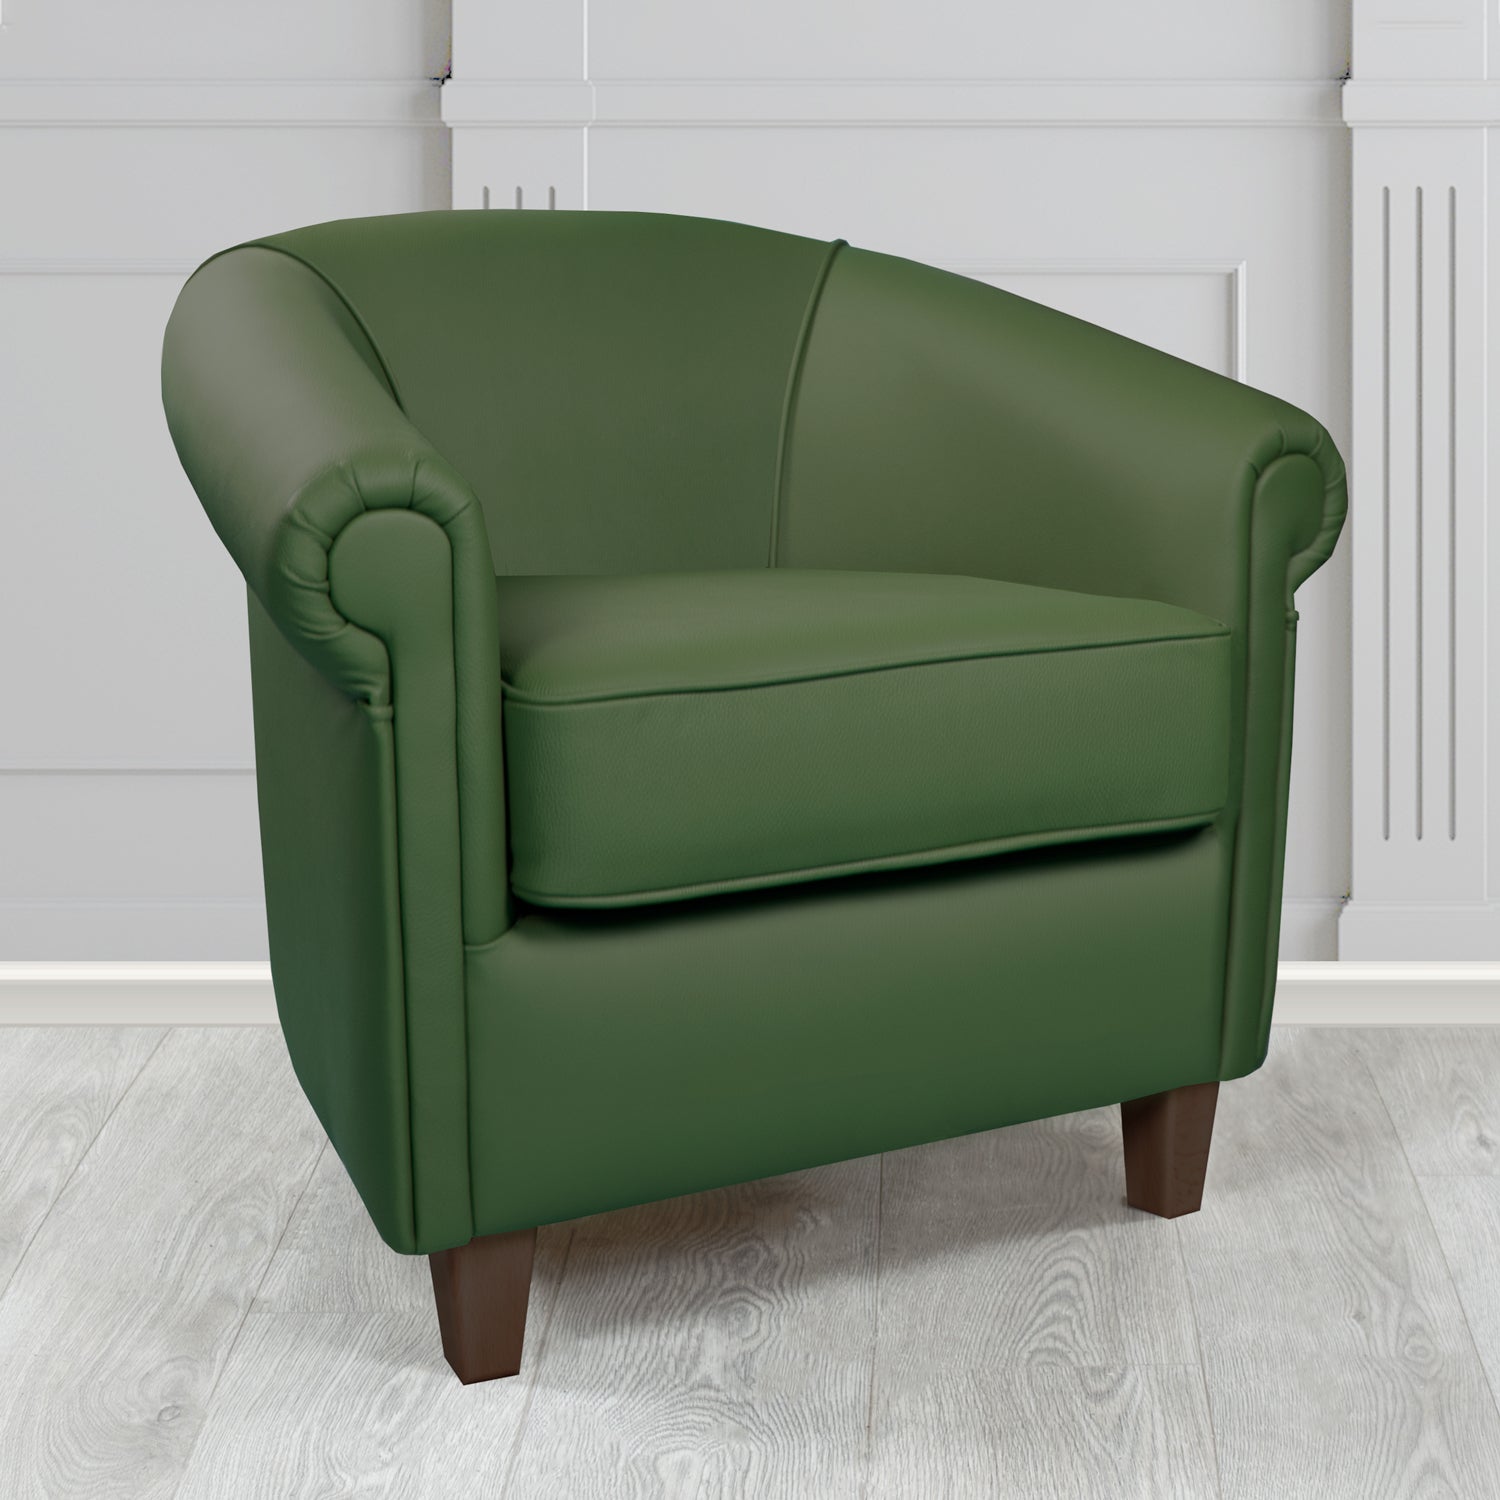 Siena Tub Chair in Crib 5 Shelly Forest Green Genuine Leather - The Tub Chair Shop